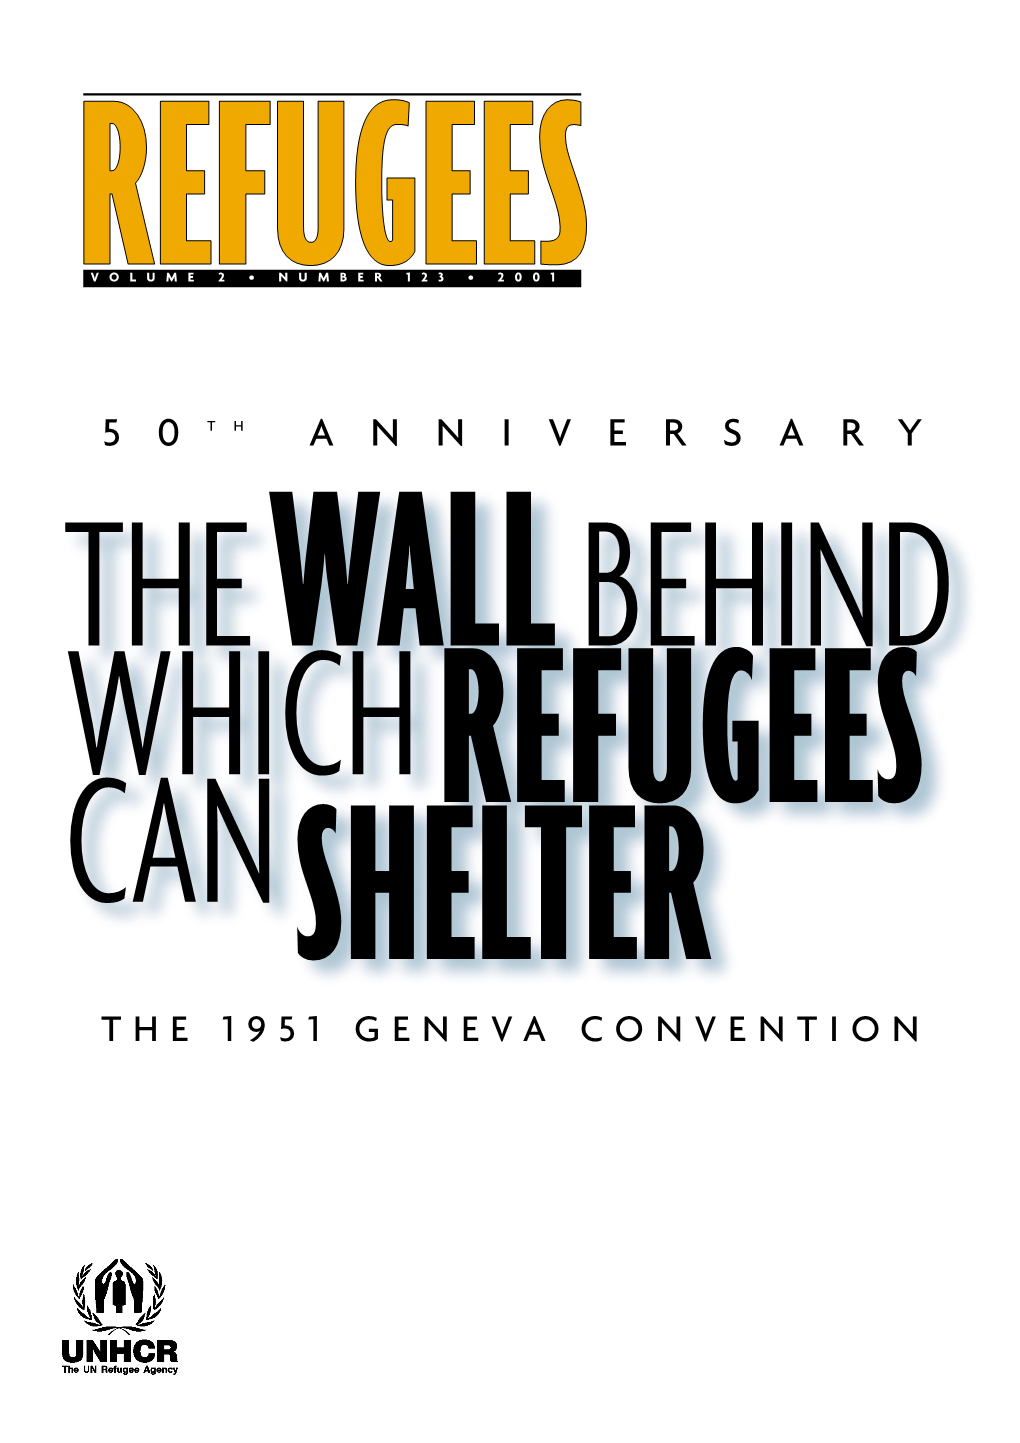 Thewallbehind Whichrefugees Canshelter the 1951 Geneva Convention N°123 - 2001